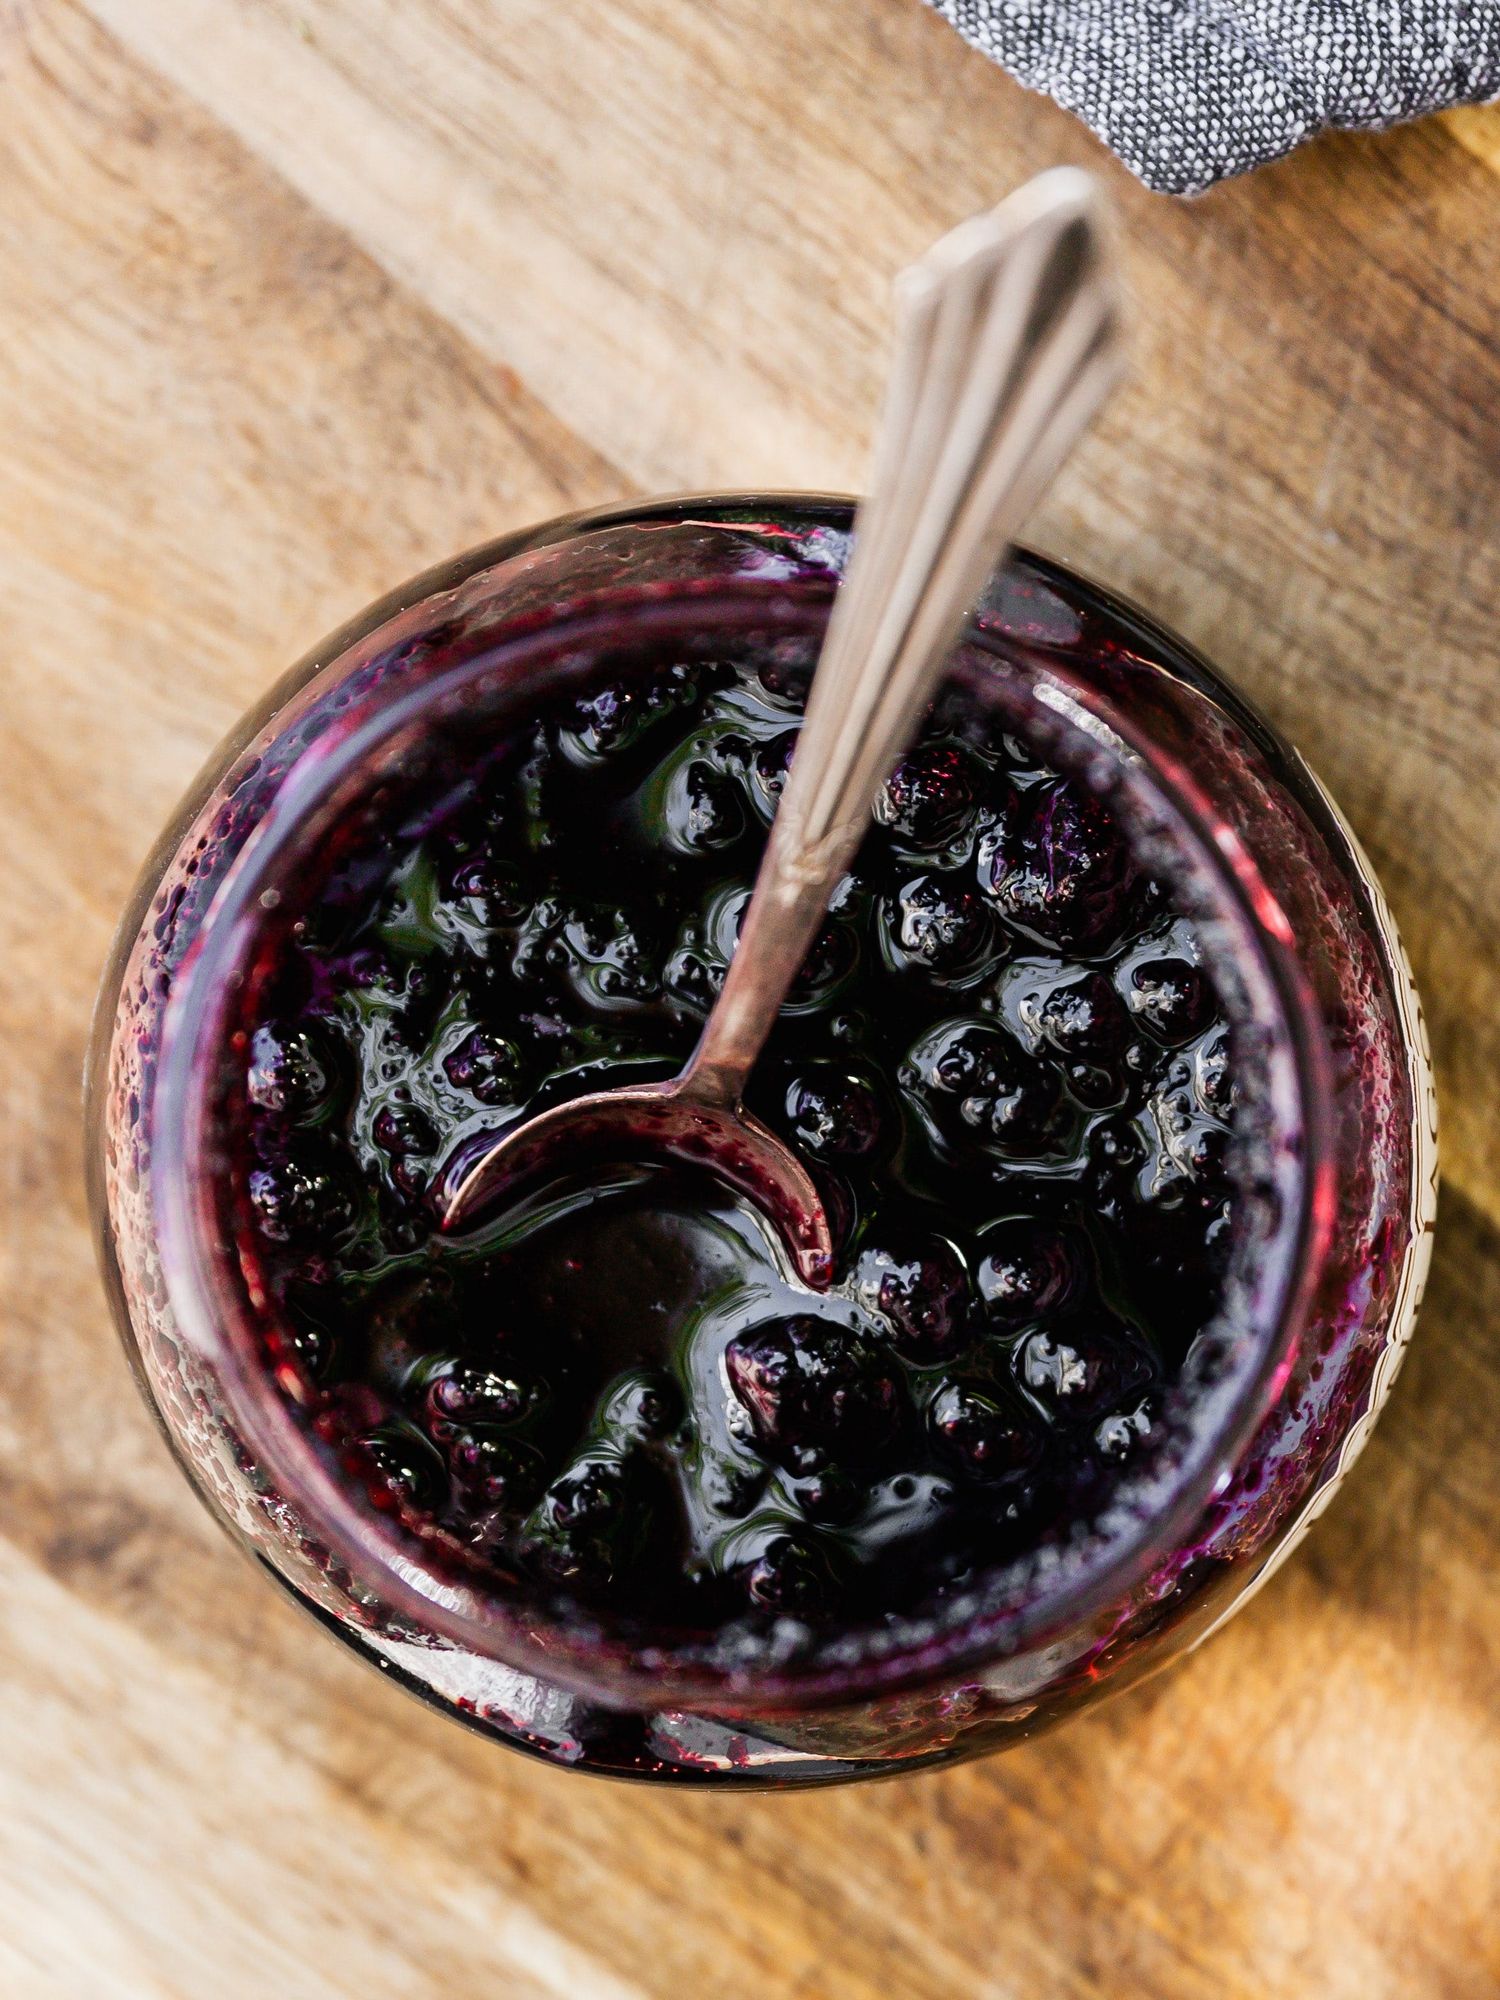 jam jar with blueberries from above